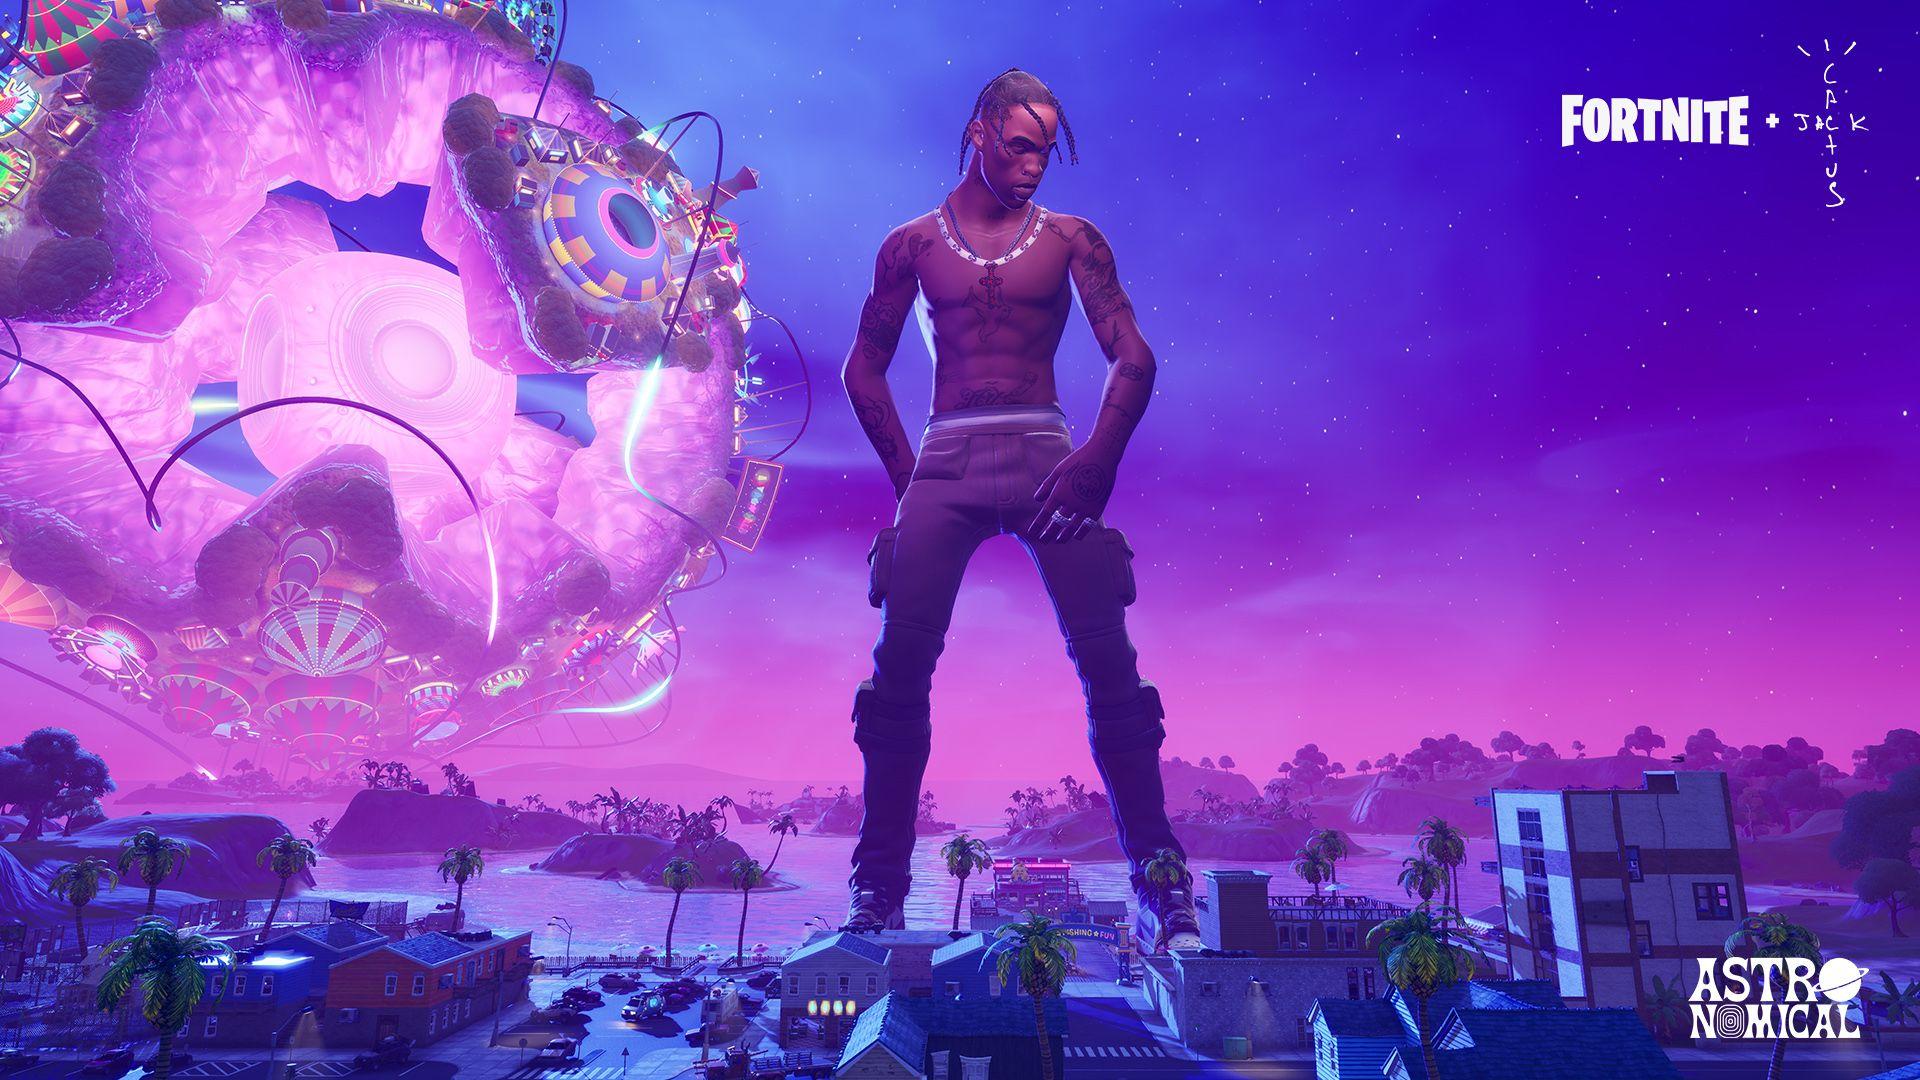 Travis Scott's Fortnite concert pulled in Astronomical numbers